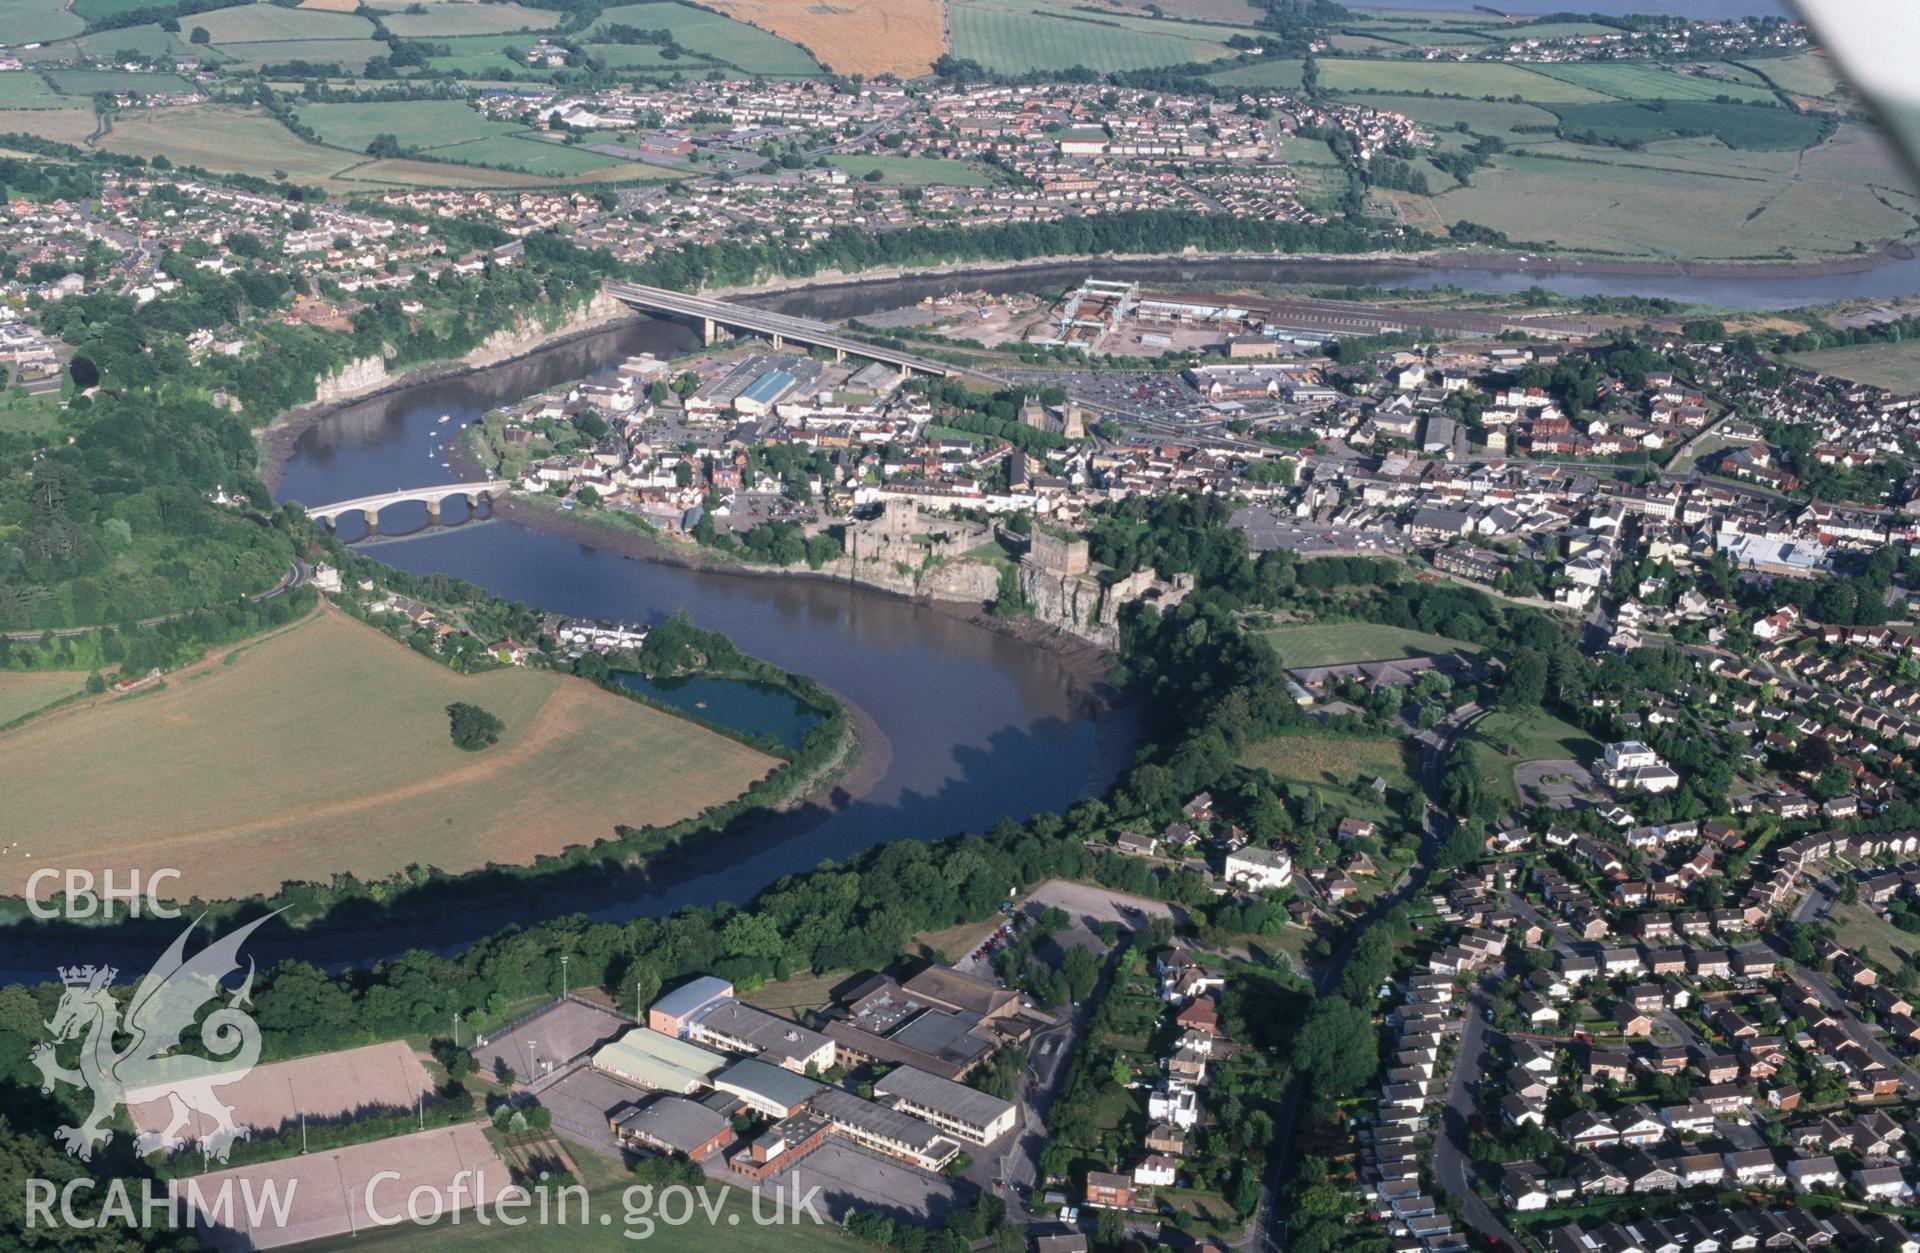 Slide of RCAHMW colour oblique aerial photograph of Chepstow Town Plans, taken by T.G. Driver, 22/7/1999.